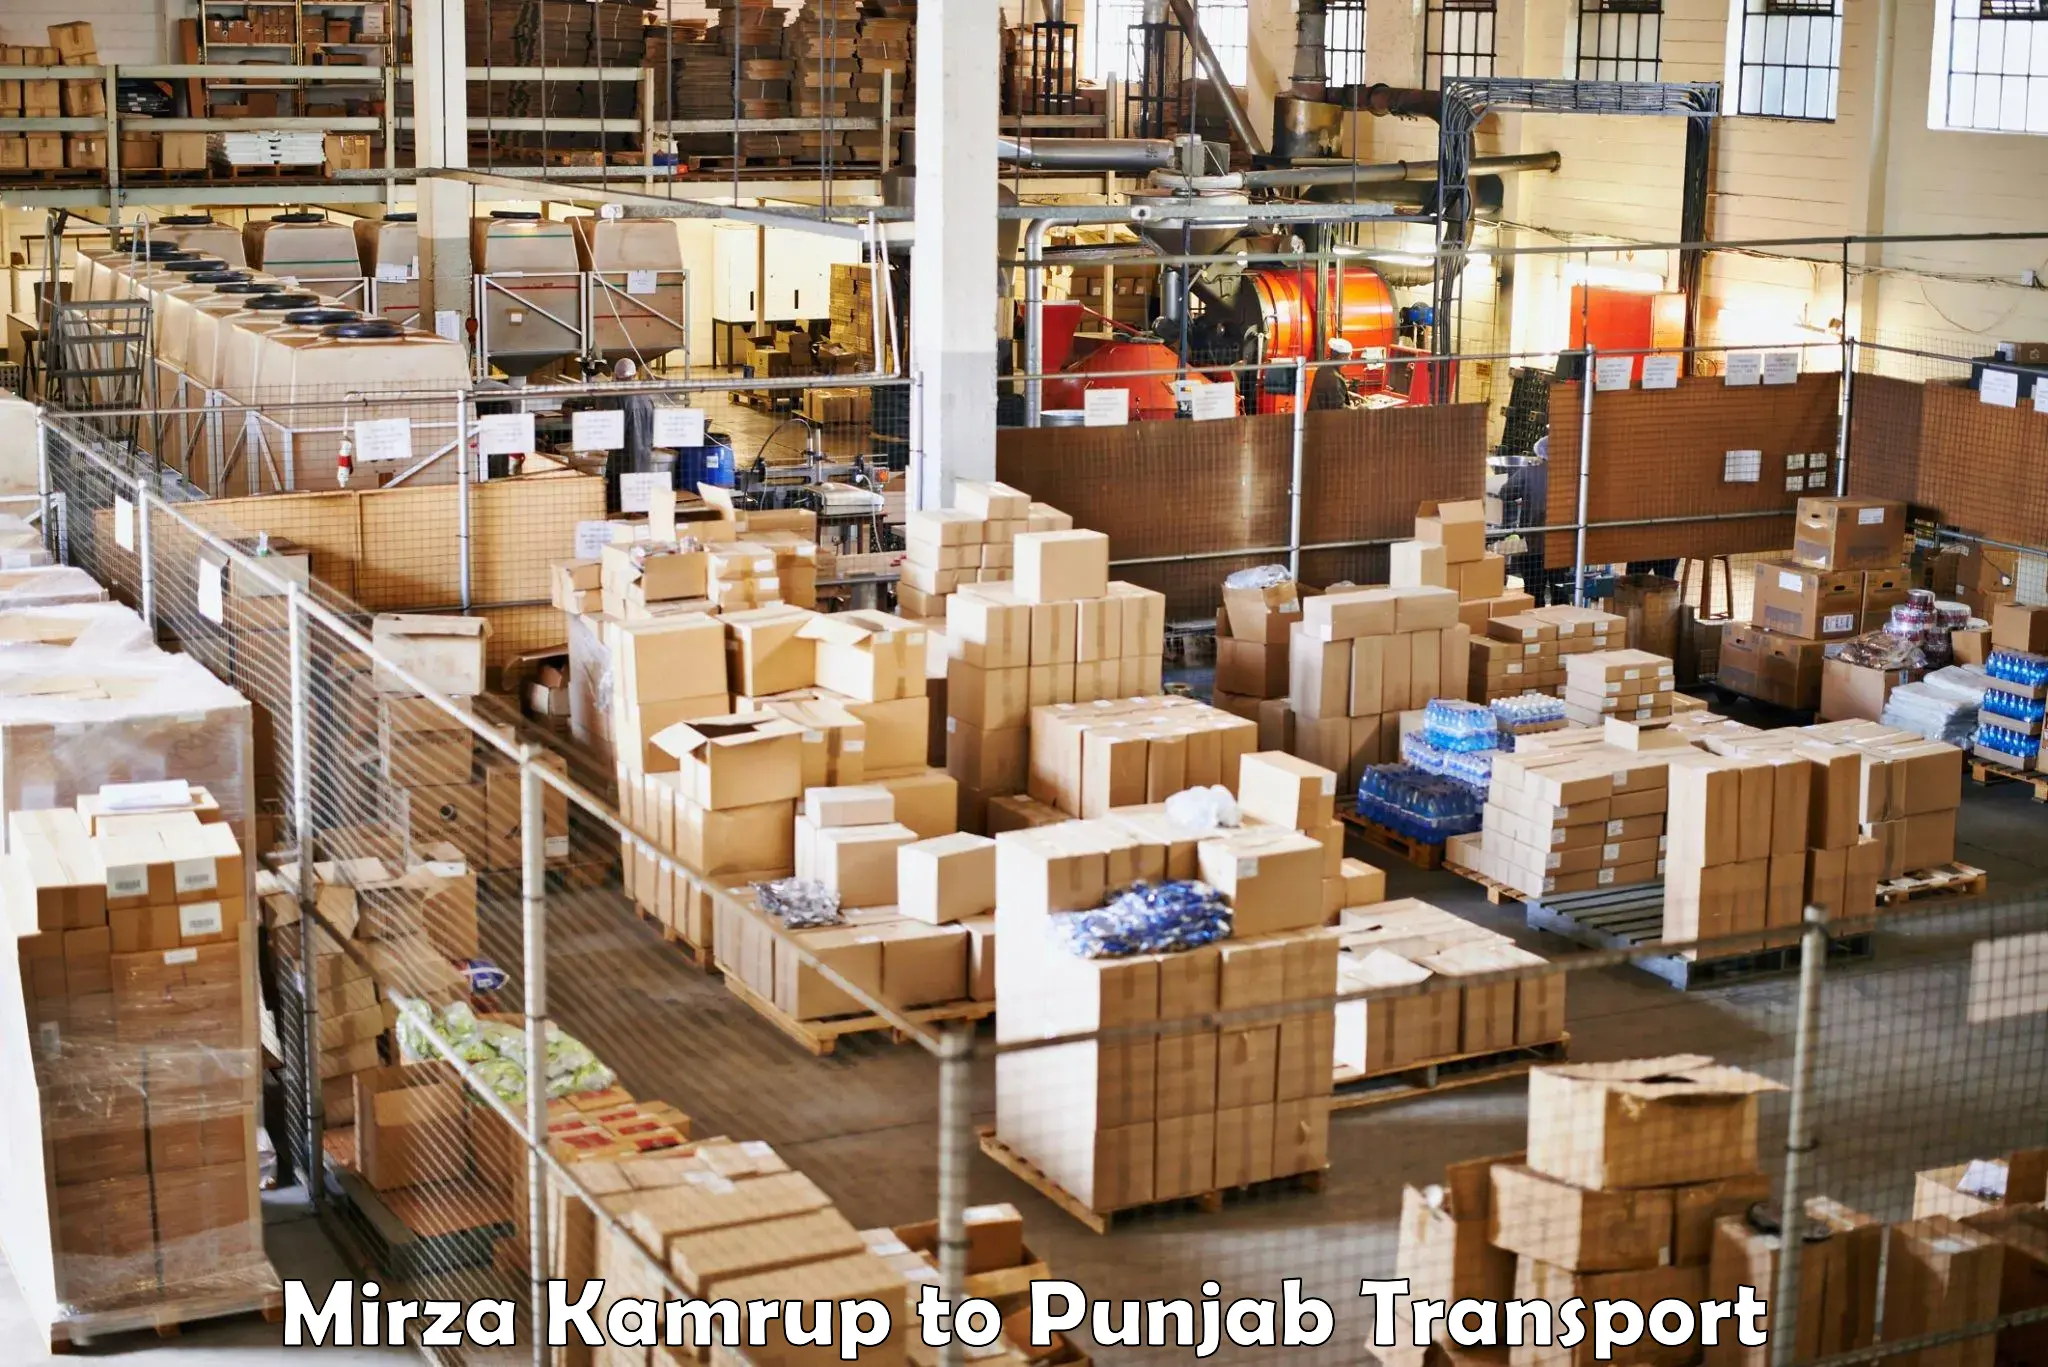 Parcel transport services Mirza Kamrup to Dhuri